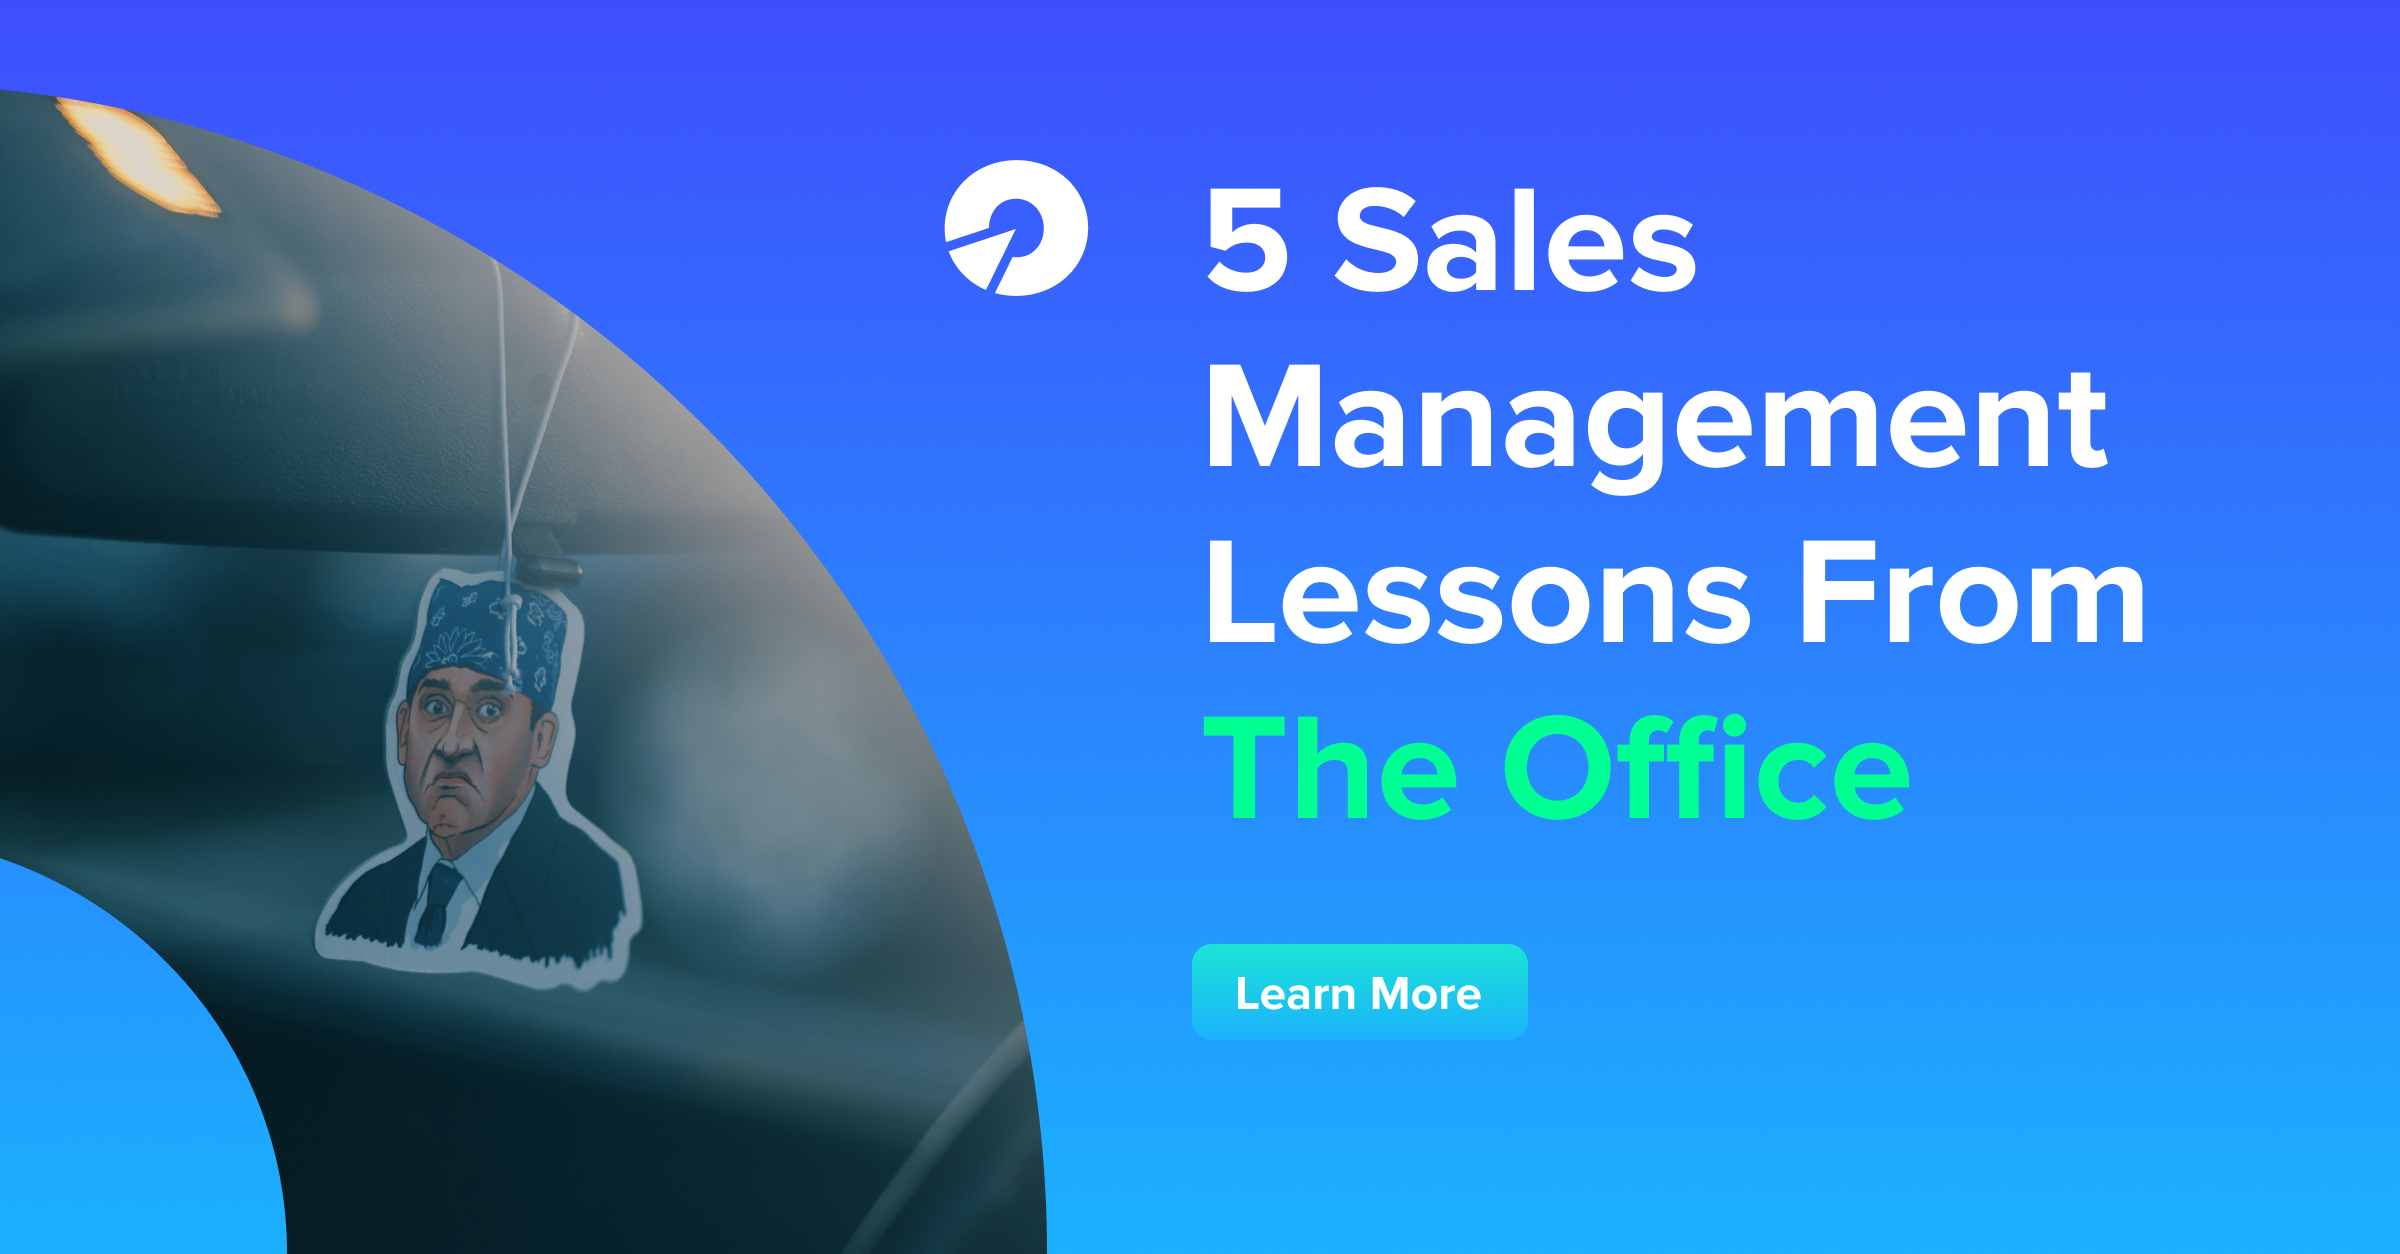 5 Sales Management Lessons From The Office